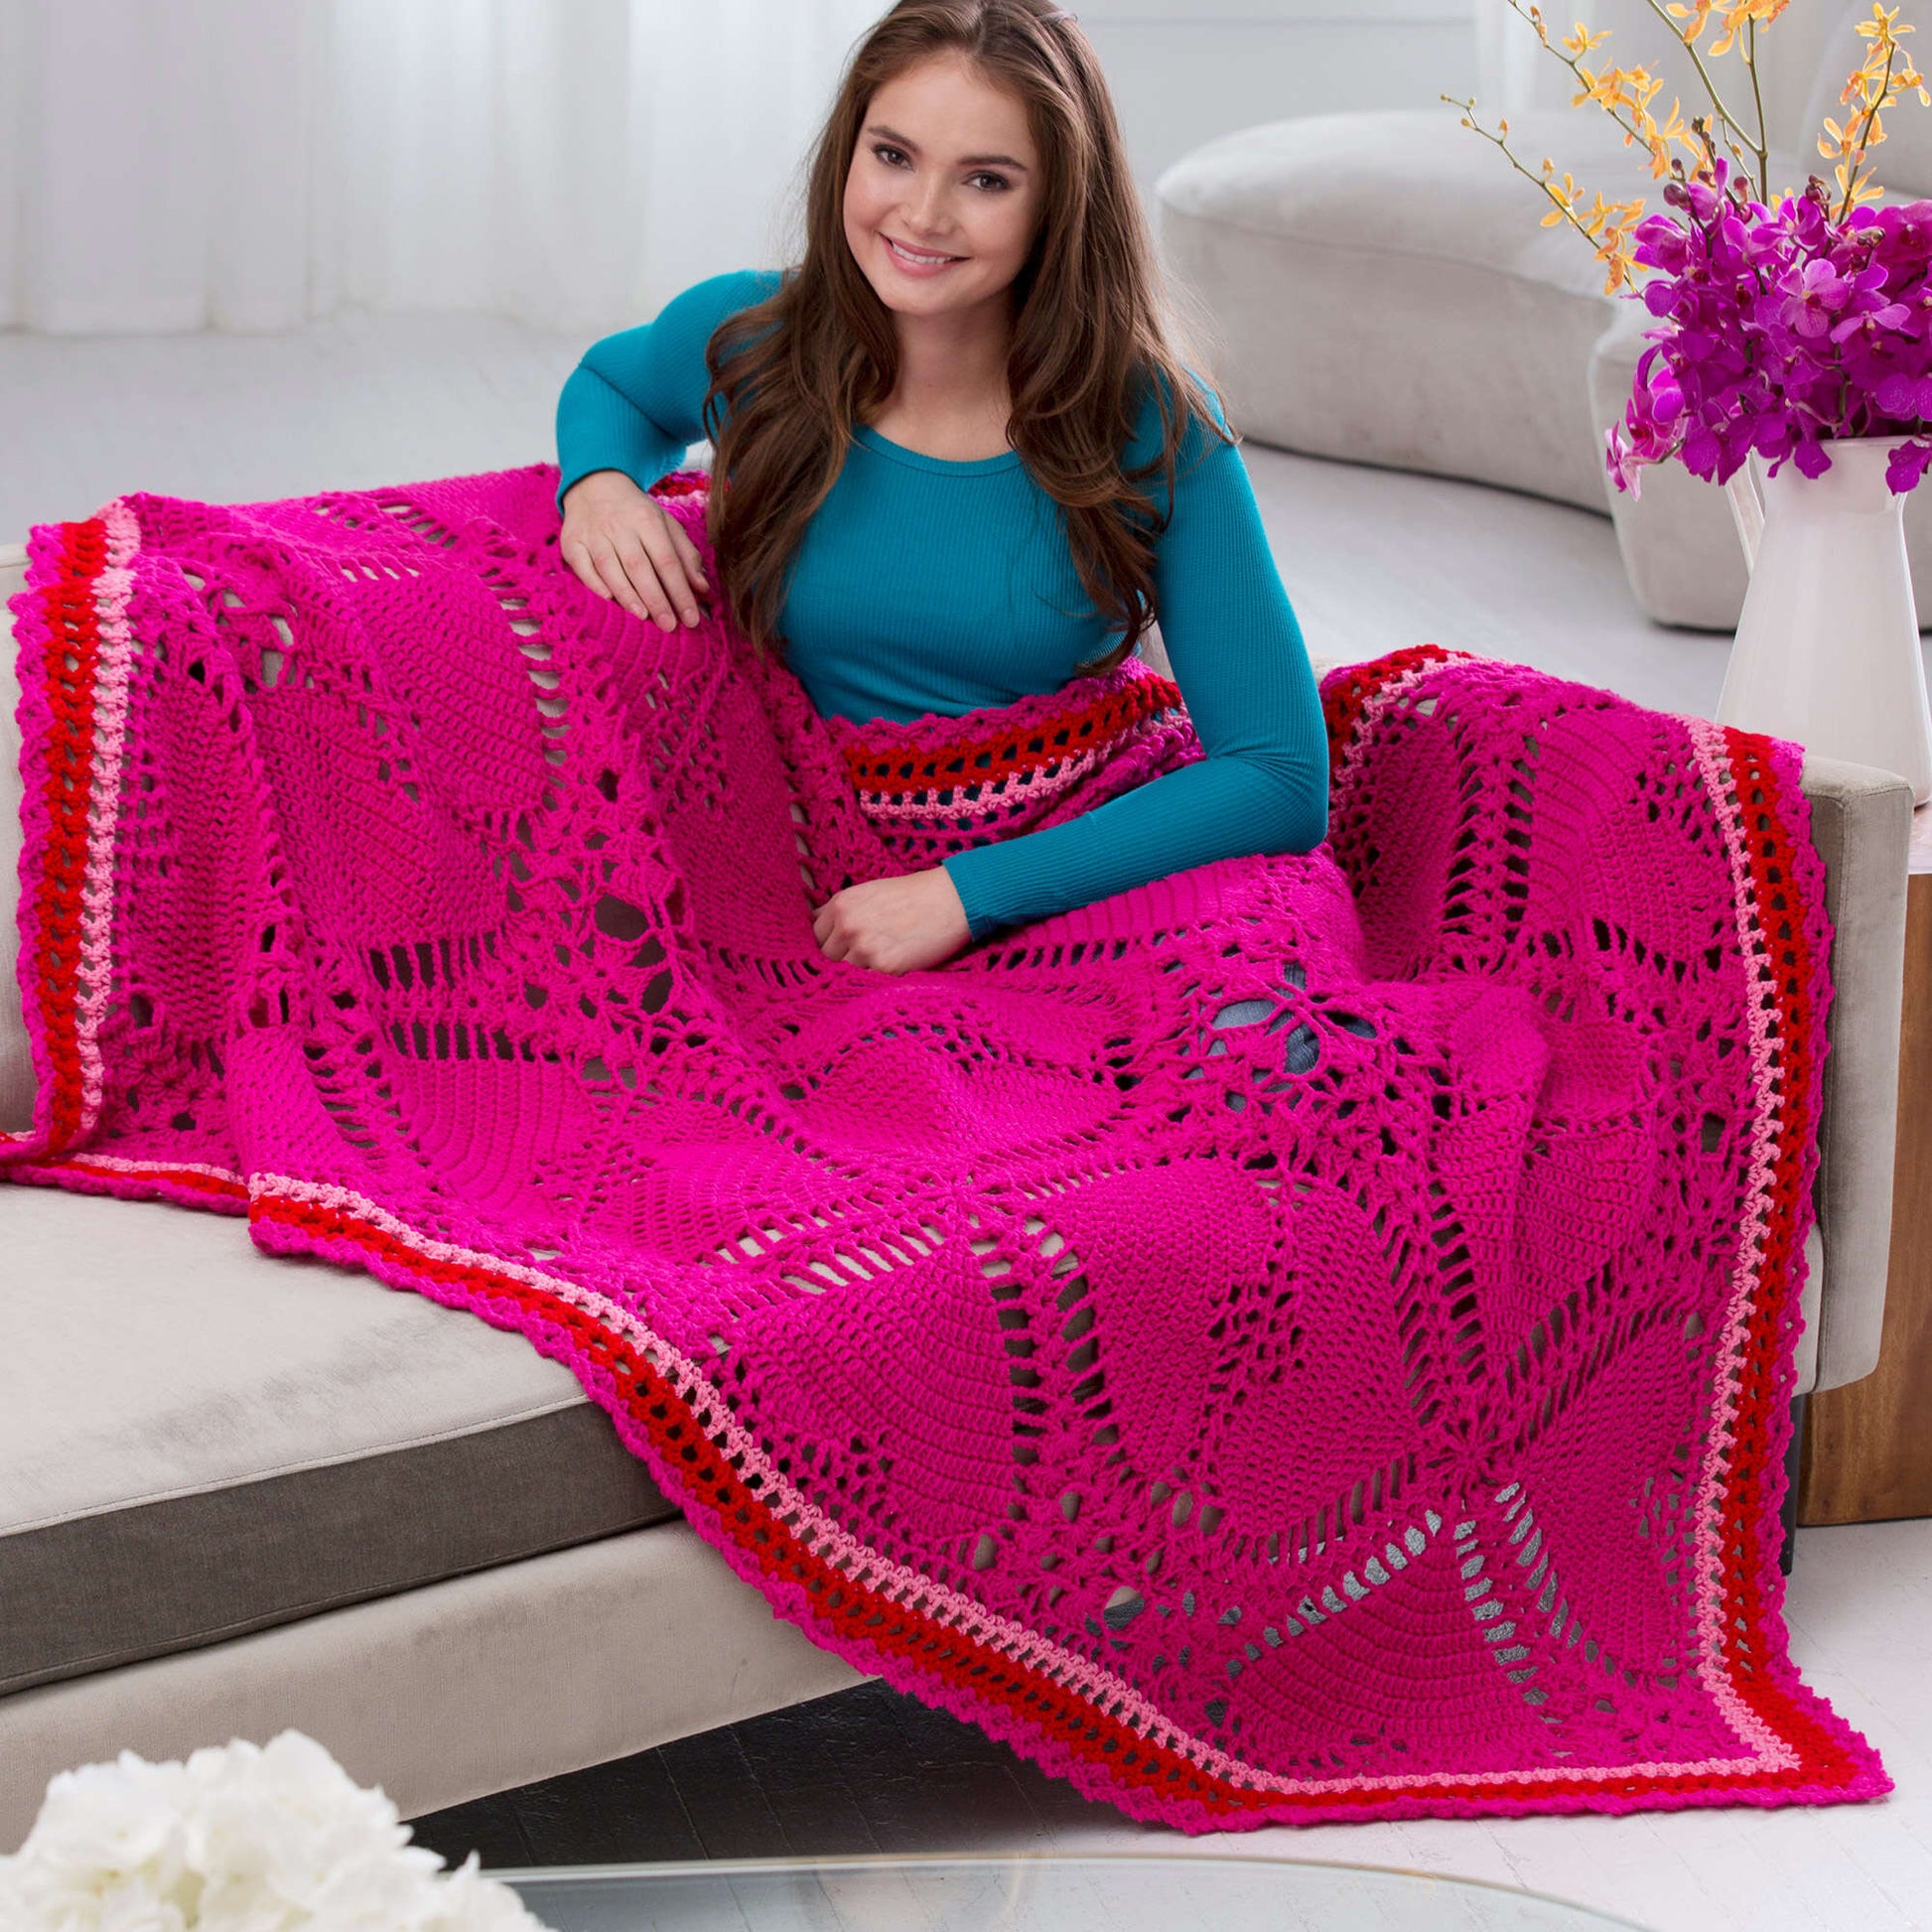 Free Red Heart Lovely Hearts Throw Crochet Pattern